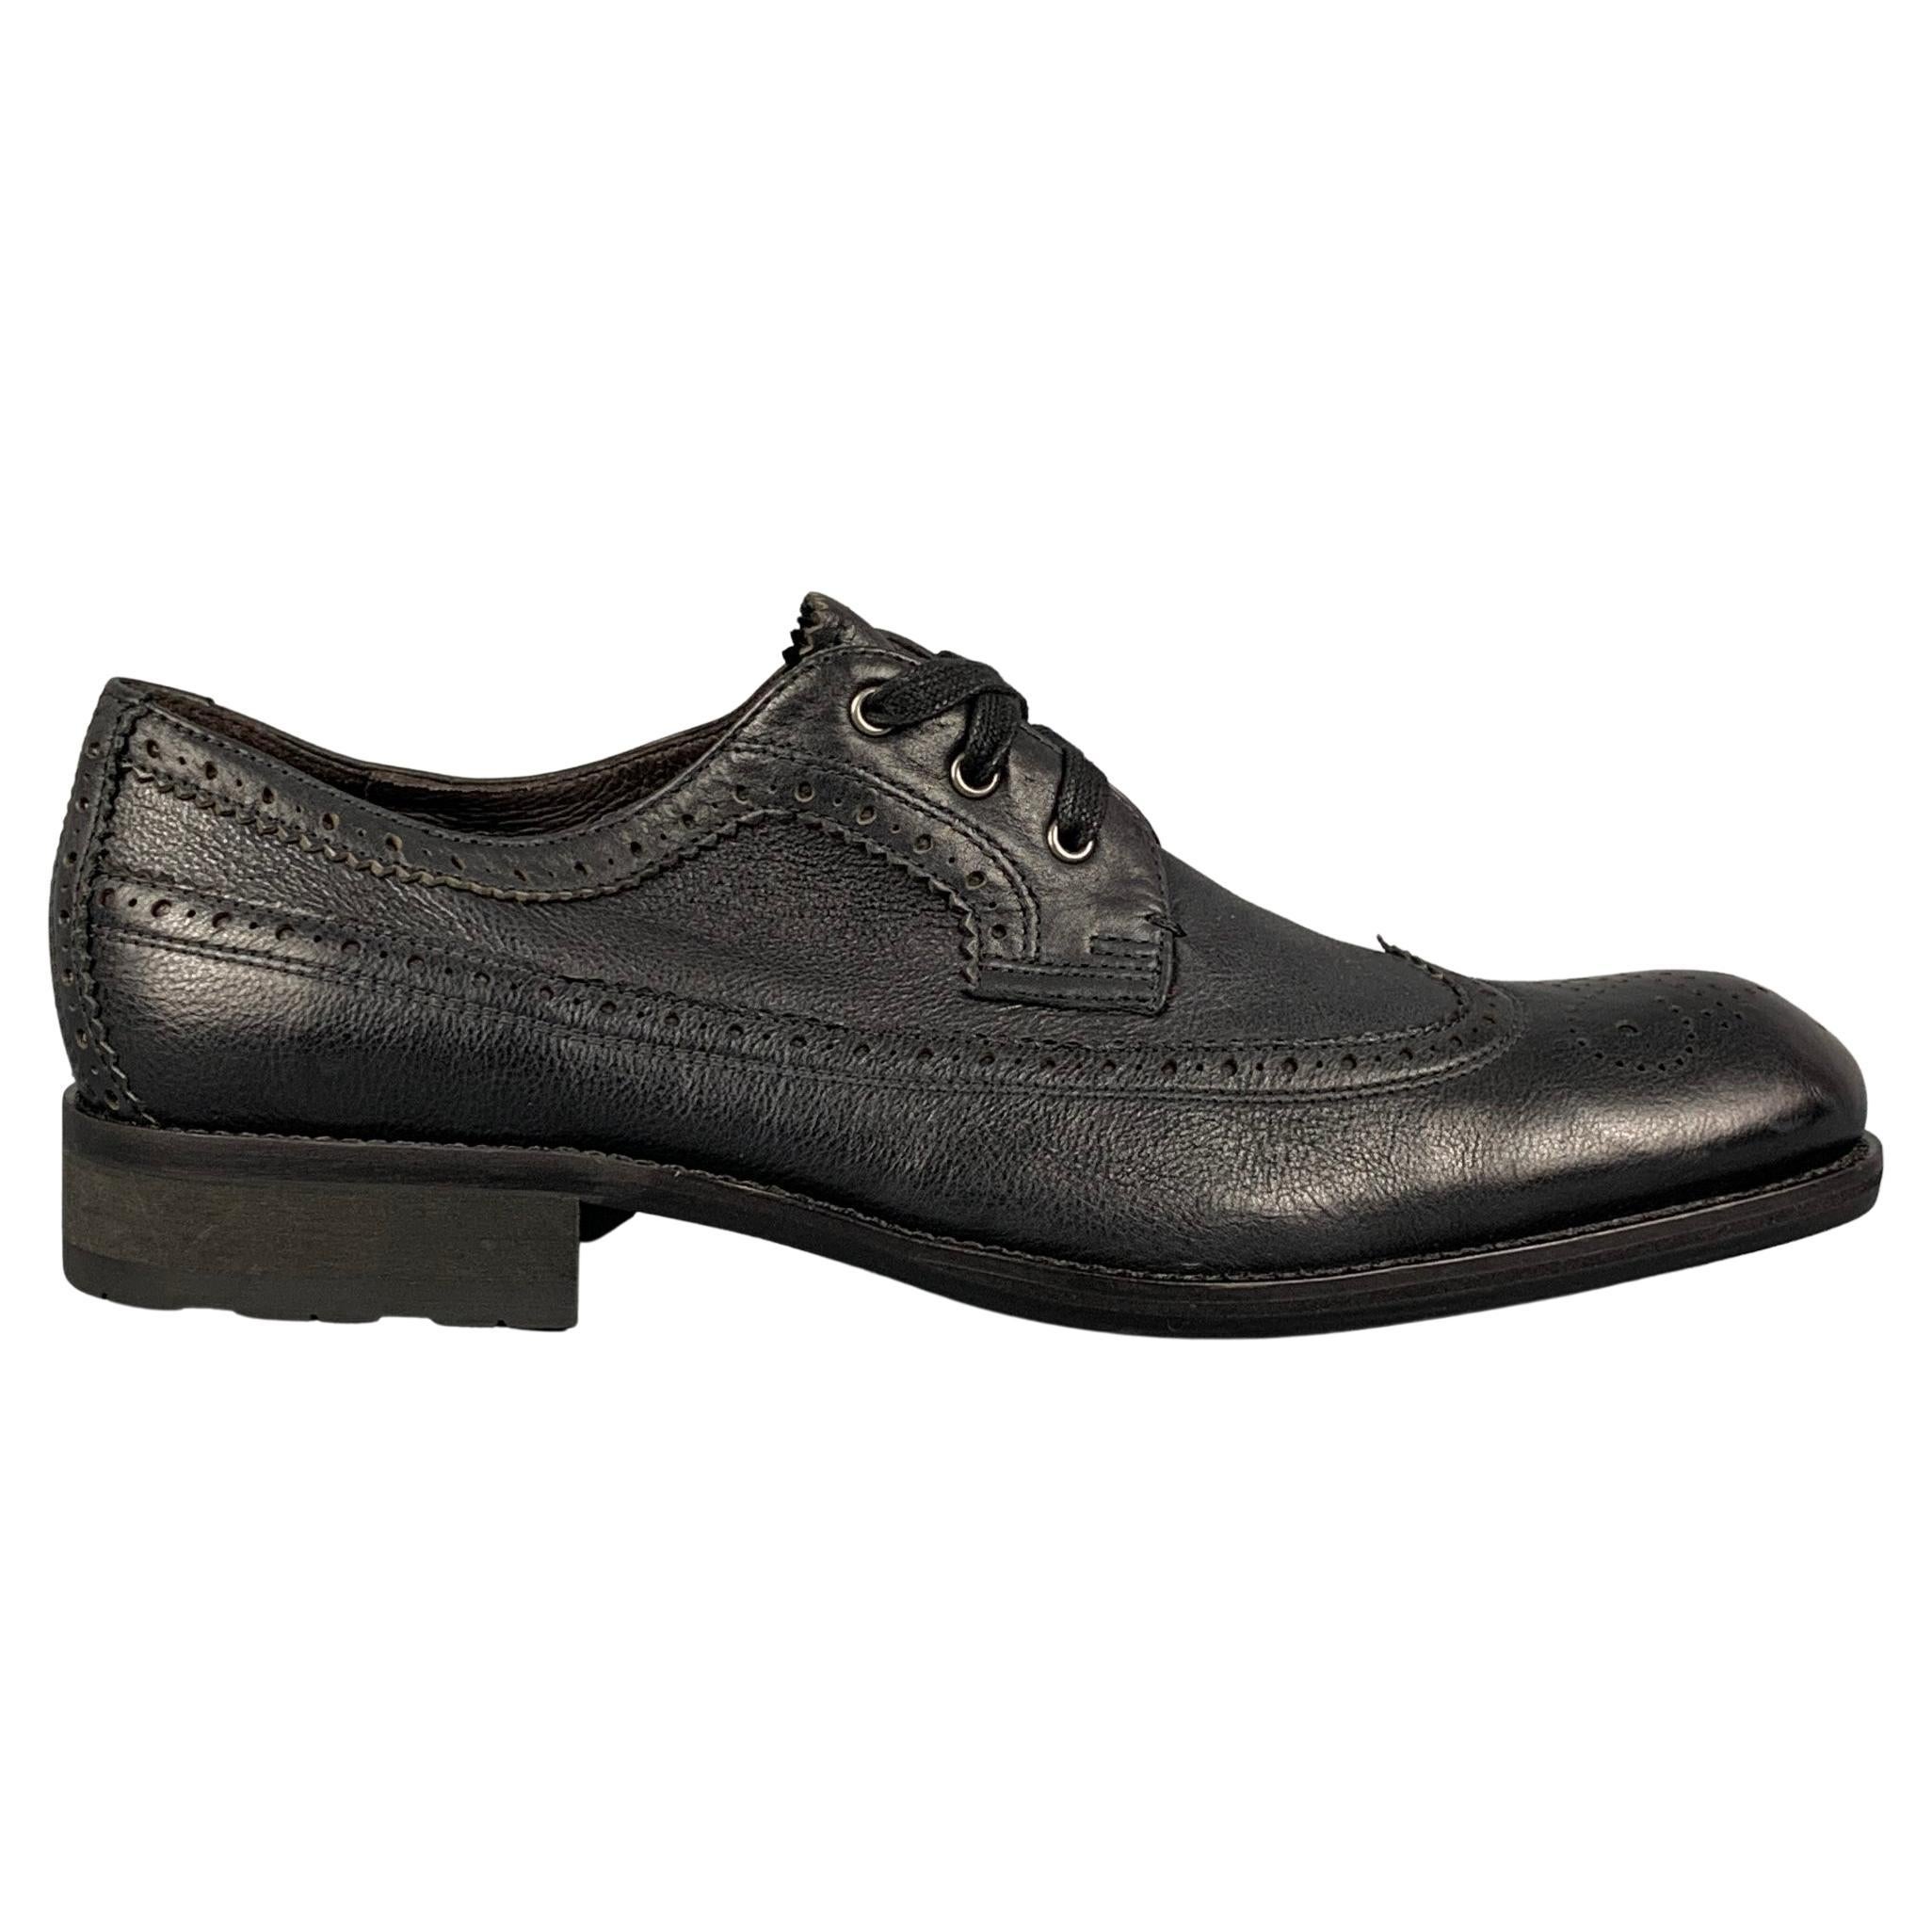 JOHN VARVATOS * U.S.A. Size 8 Black Perforated Leather Wingtip Lace Up Shoes